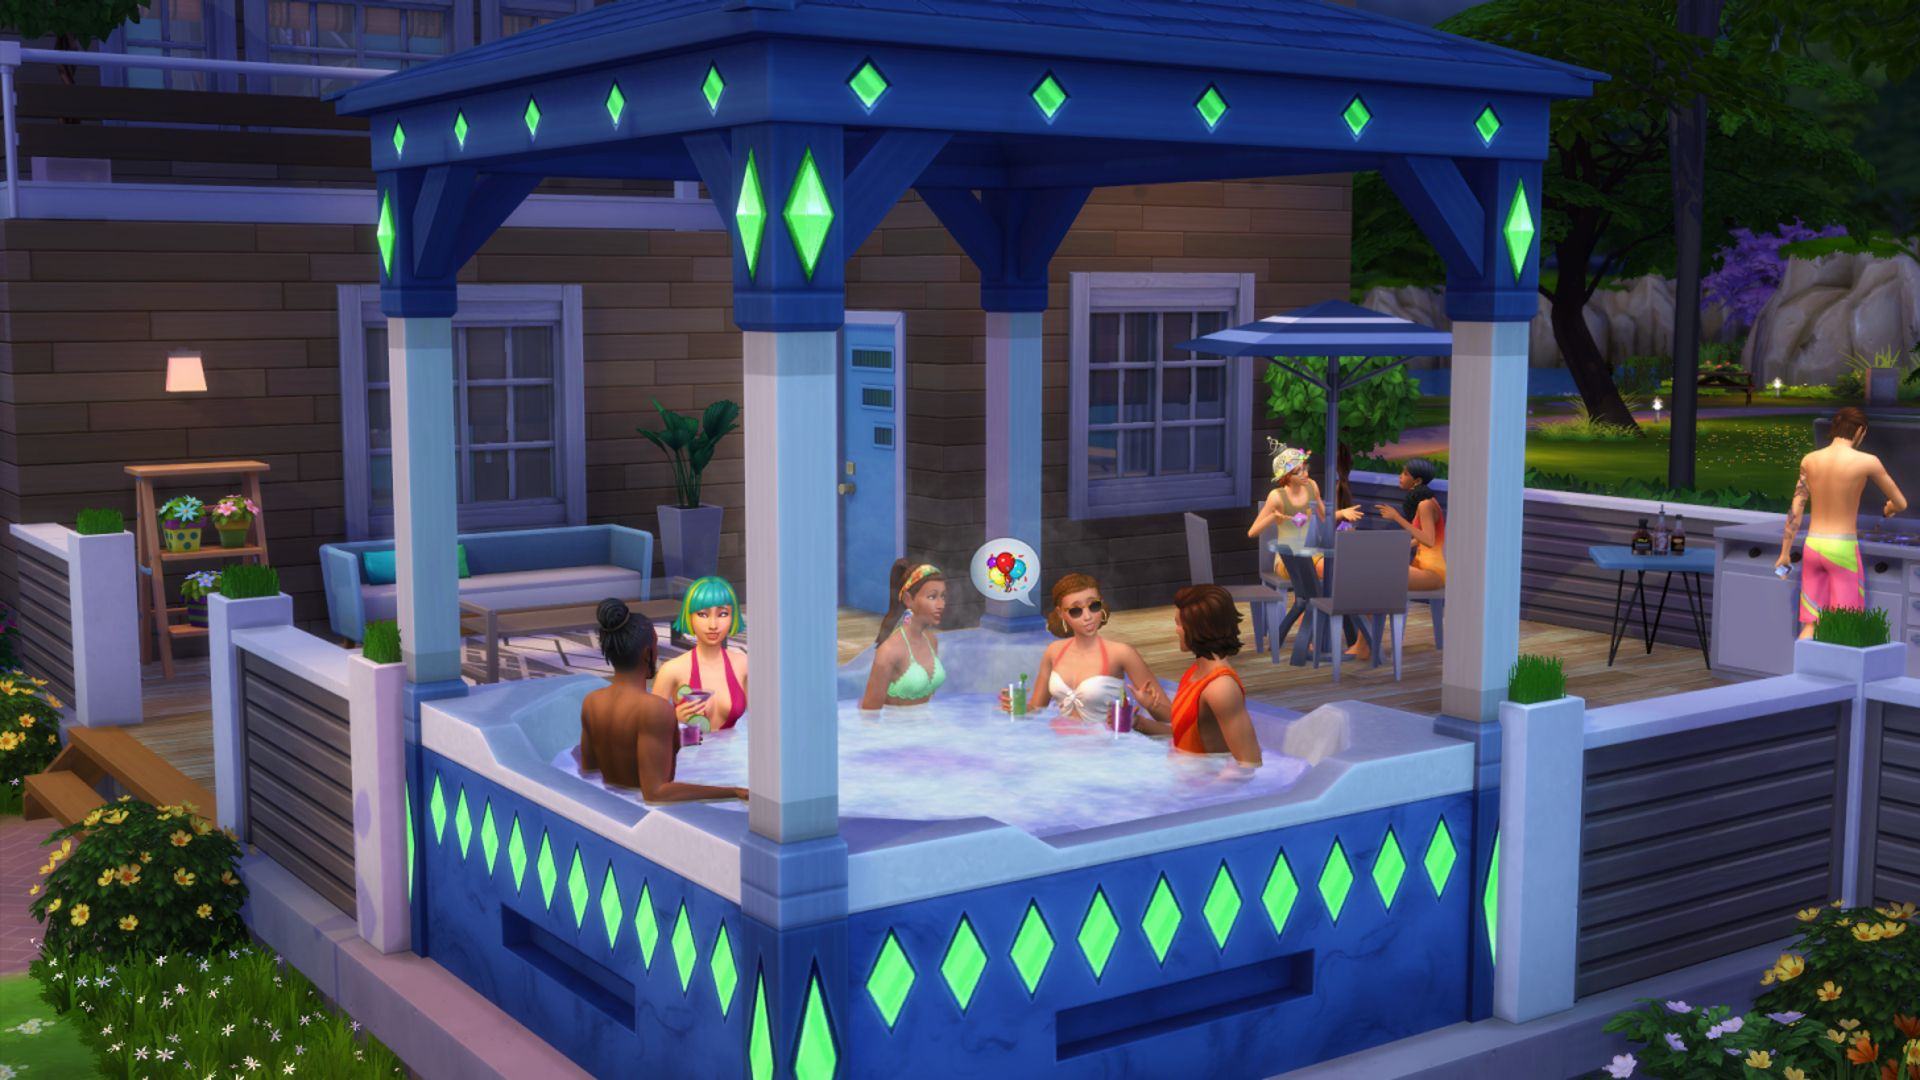 The Sims 4 Sims Socializing In Hot Tub And BBQ